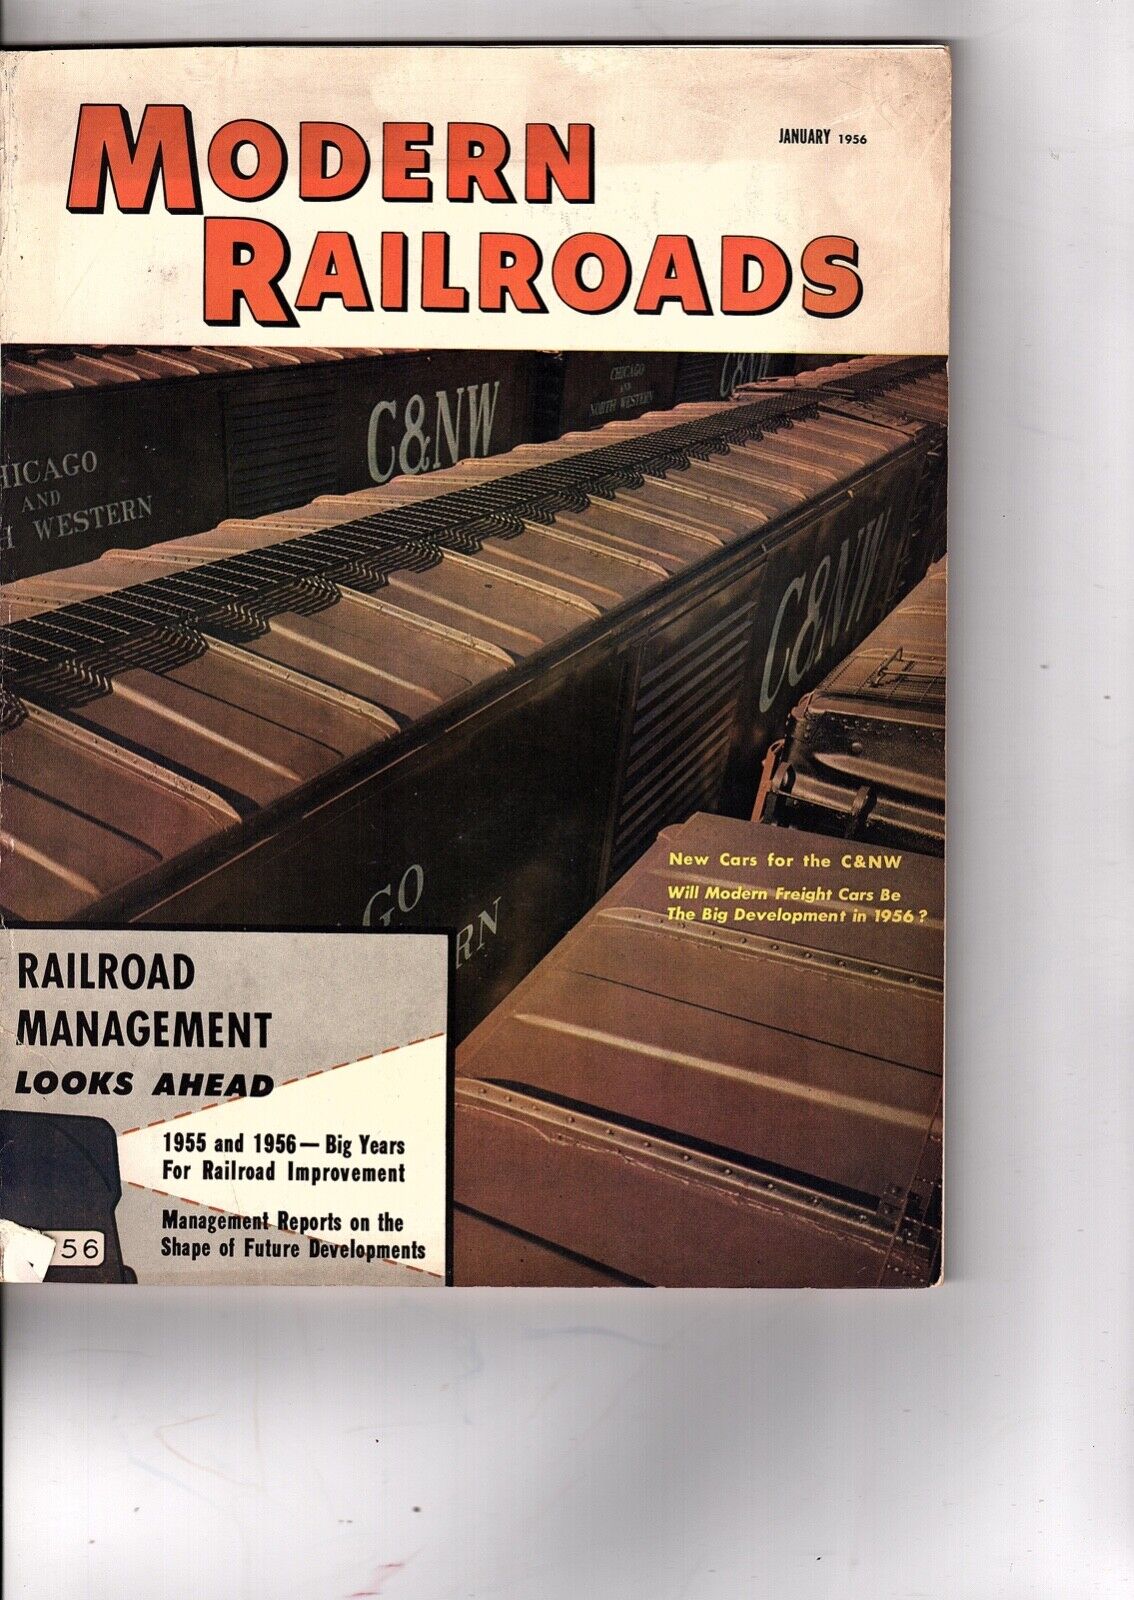 Modern Railroads January 1956  C&NW new cars and rr management (j1000